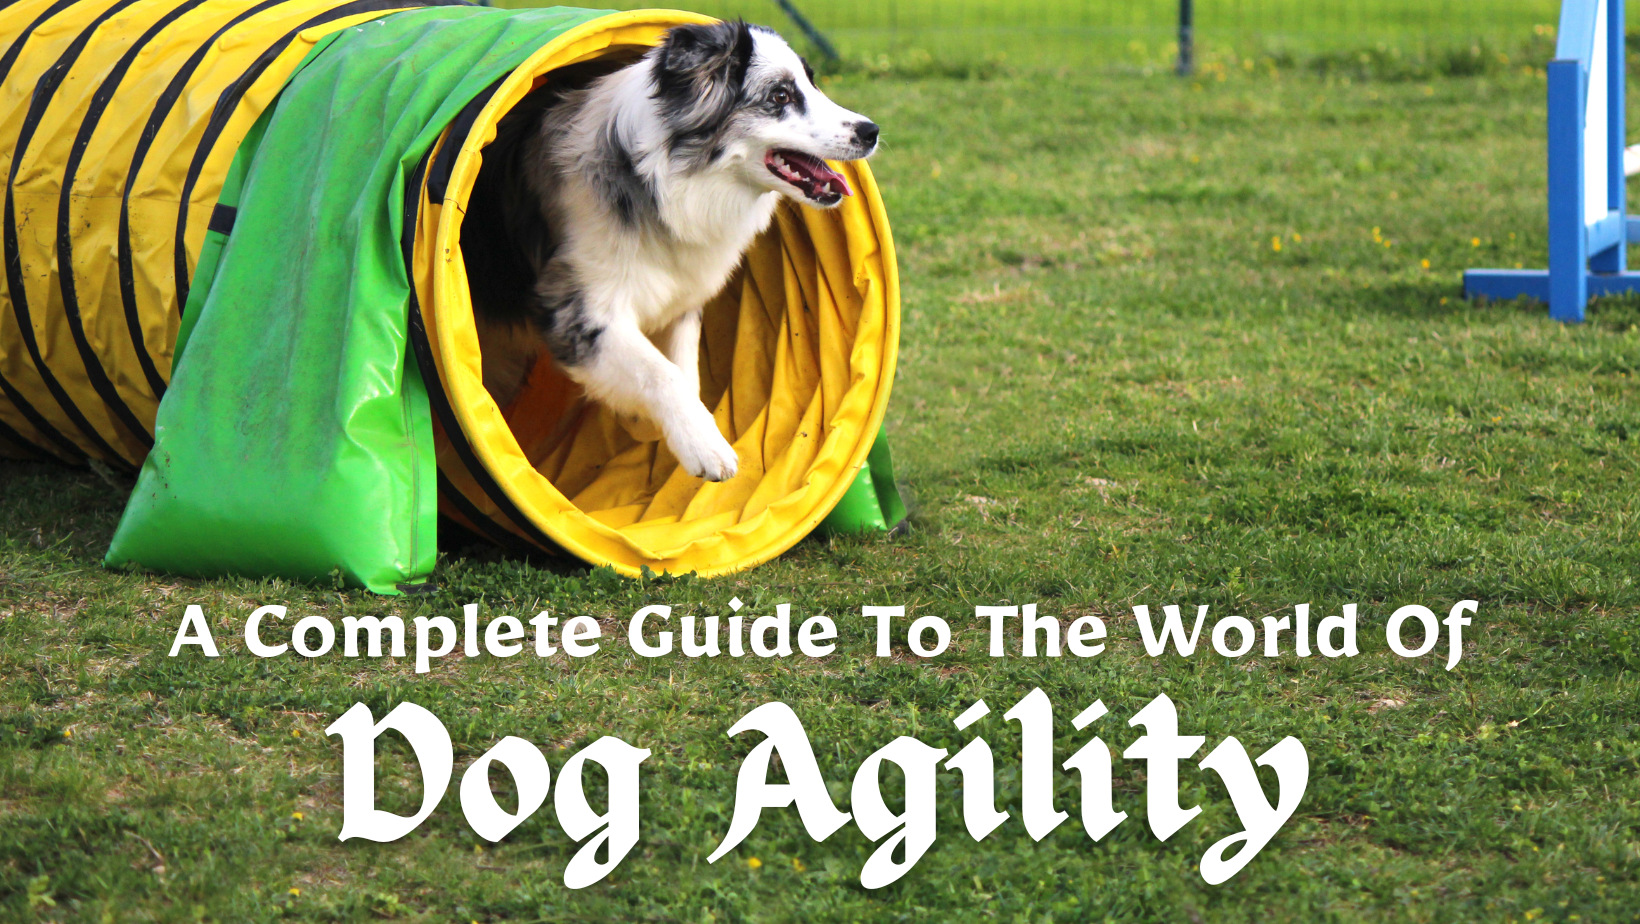 Fun For Tails Premium Dog Agility Training Equipment, Build Any Dog Agility  Course, Perfect Agility Training Equipment for Dogs Also Makes A Great